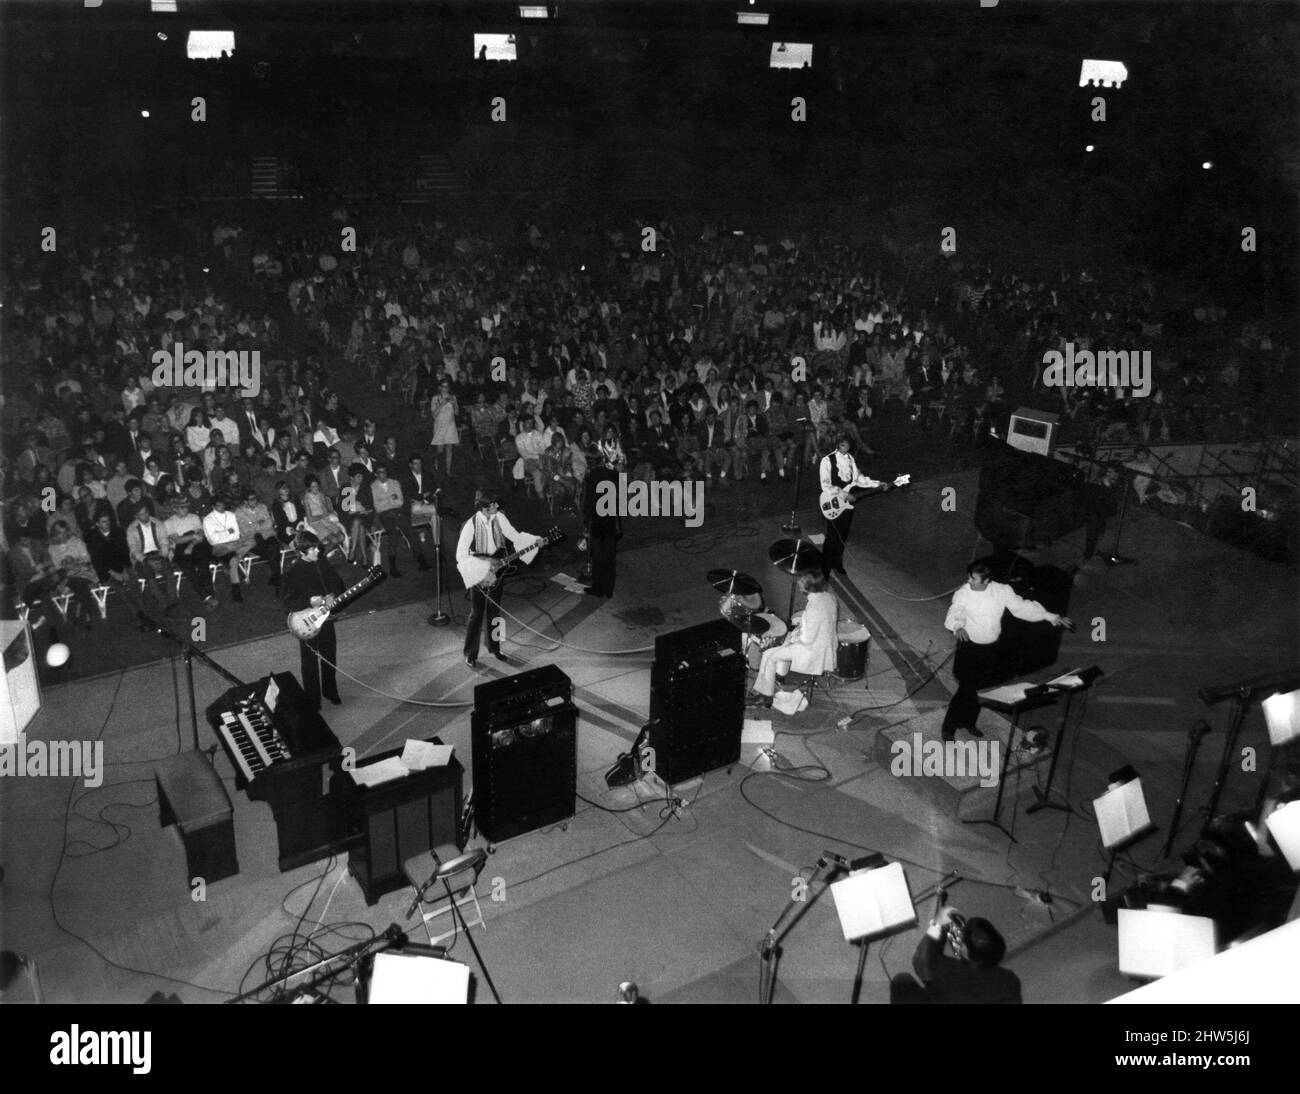 A general scene showing the Bee Gees during their performance at the Anaheim Convention Centre in California, USA. February 1968. Stock Photo